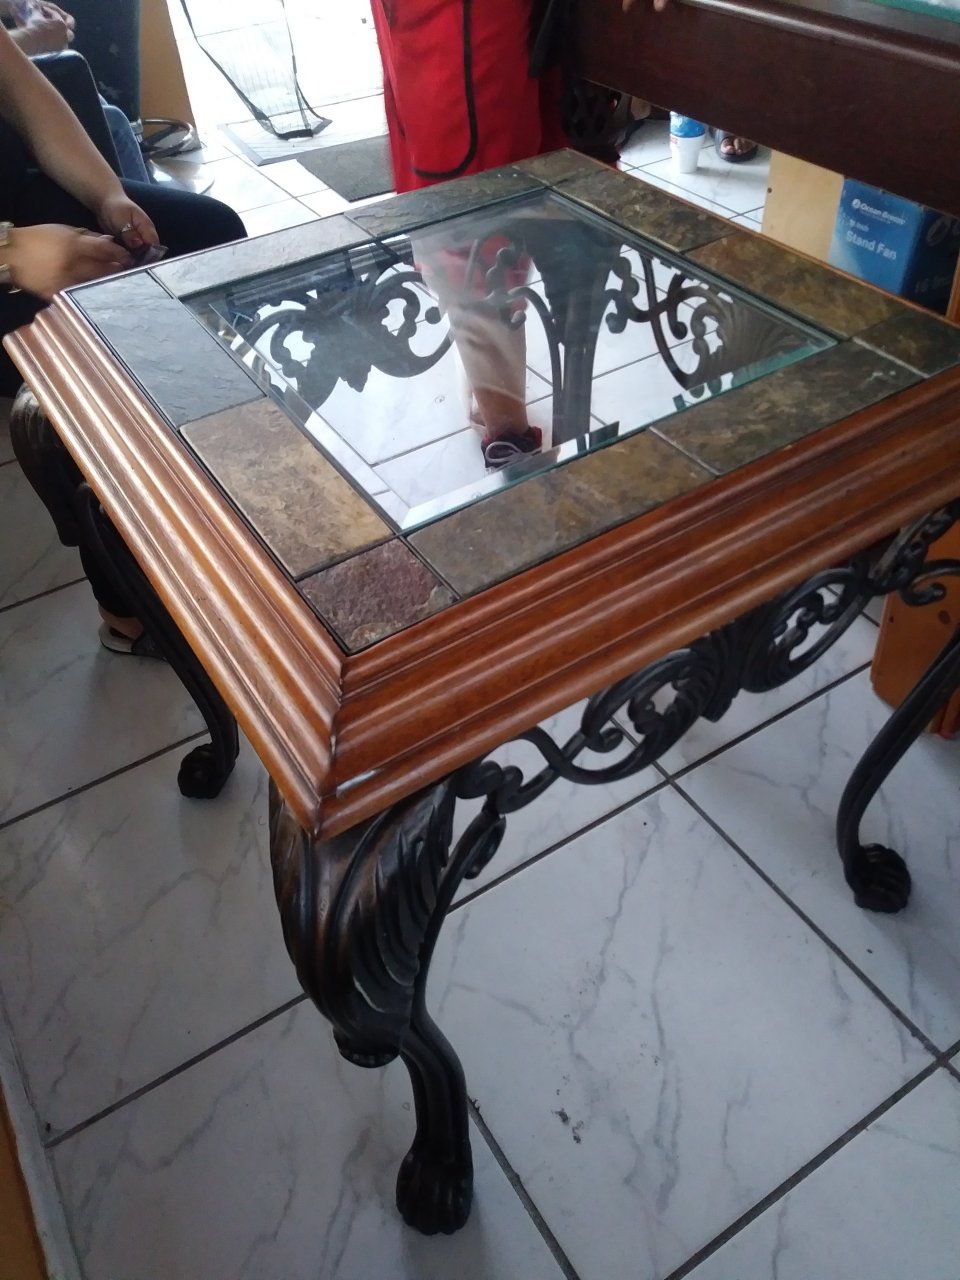 How Can I Find Out How Much This End Table Is Worth? I ...